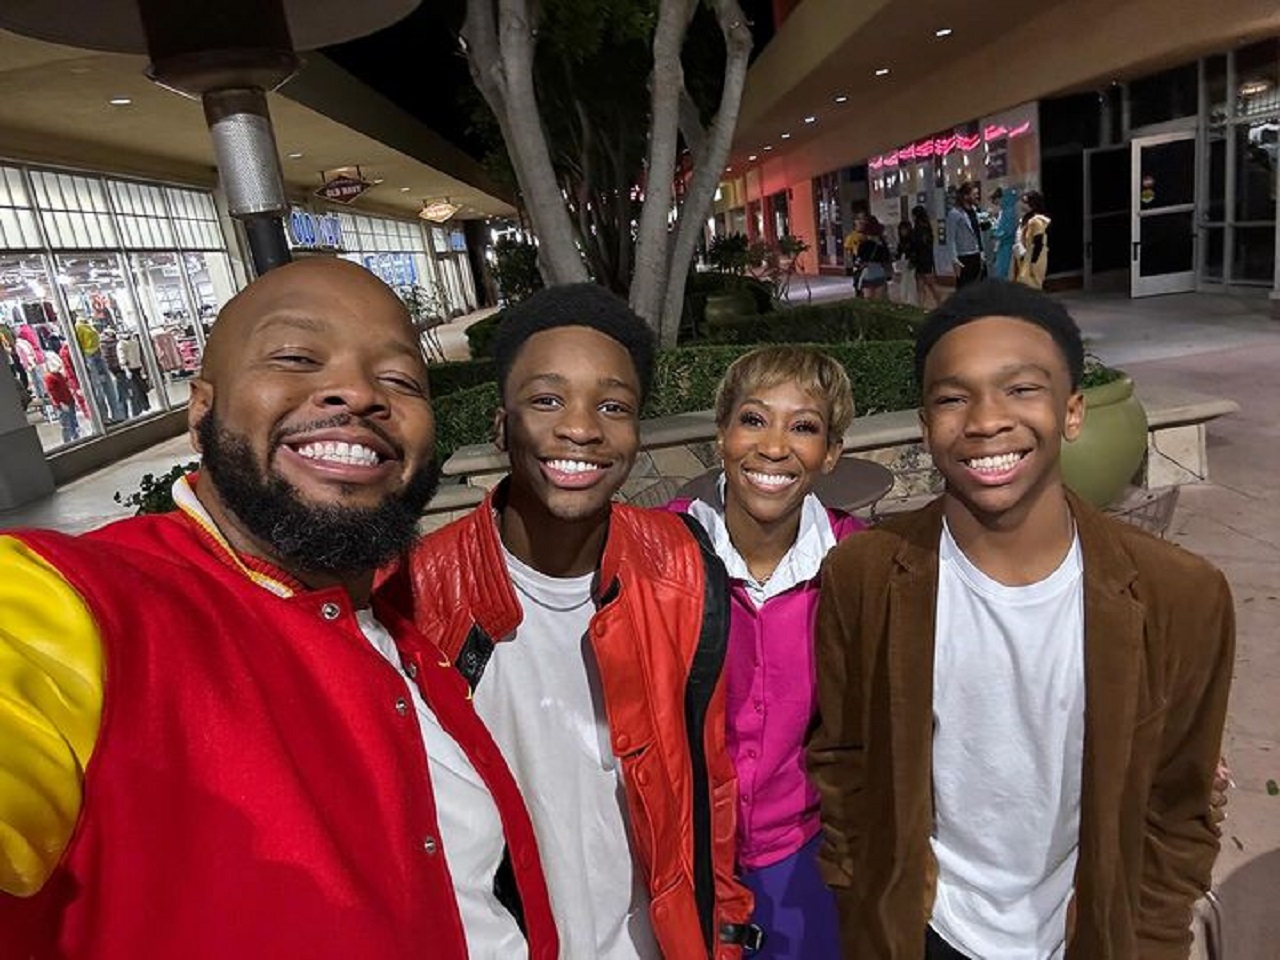 Kev On Stage taking a selfie with Isaiah, Melissa, and Josiah Fredericks near Old Navy at nighttime